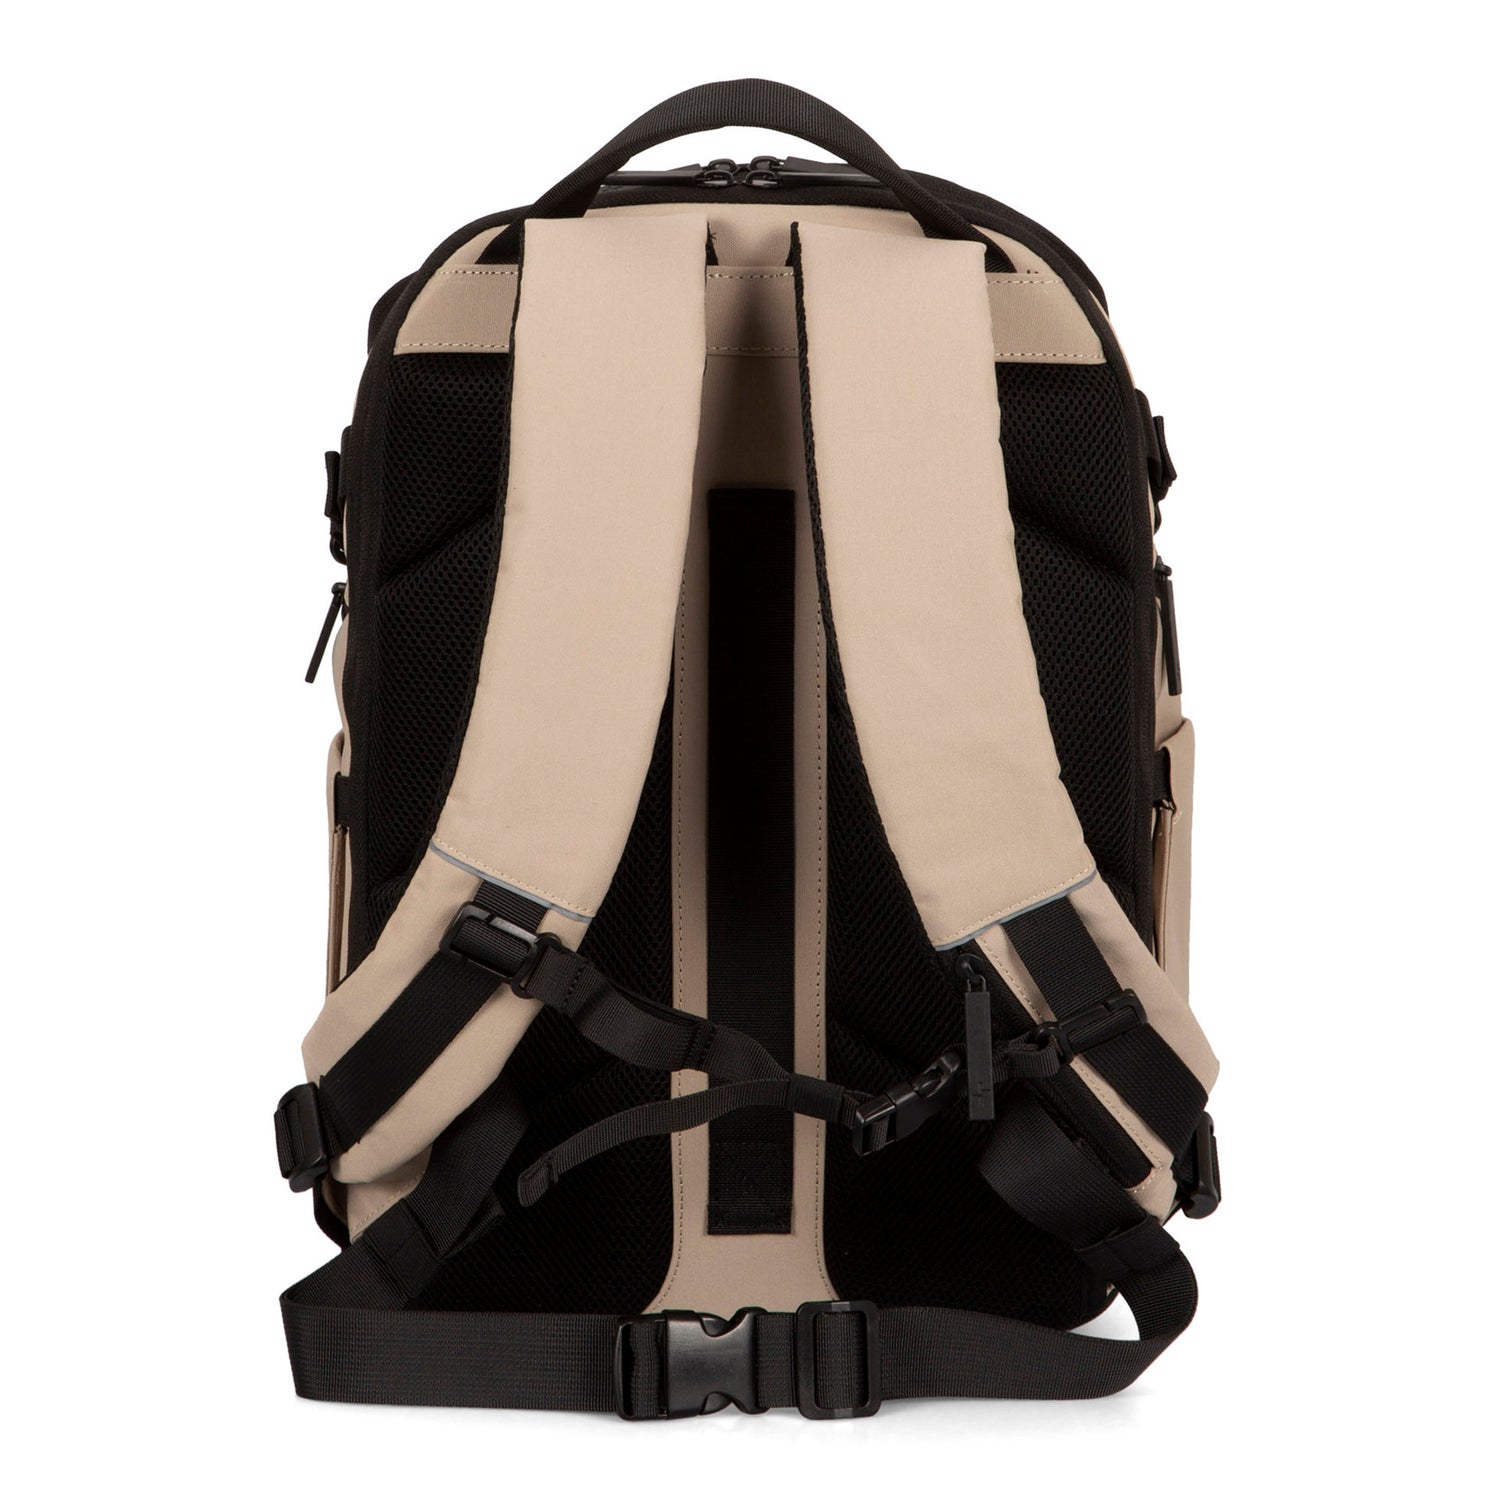 The 5 Continents Backpack - Bentley